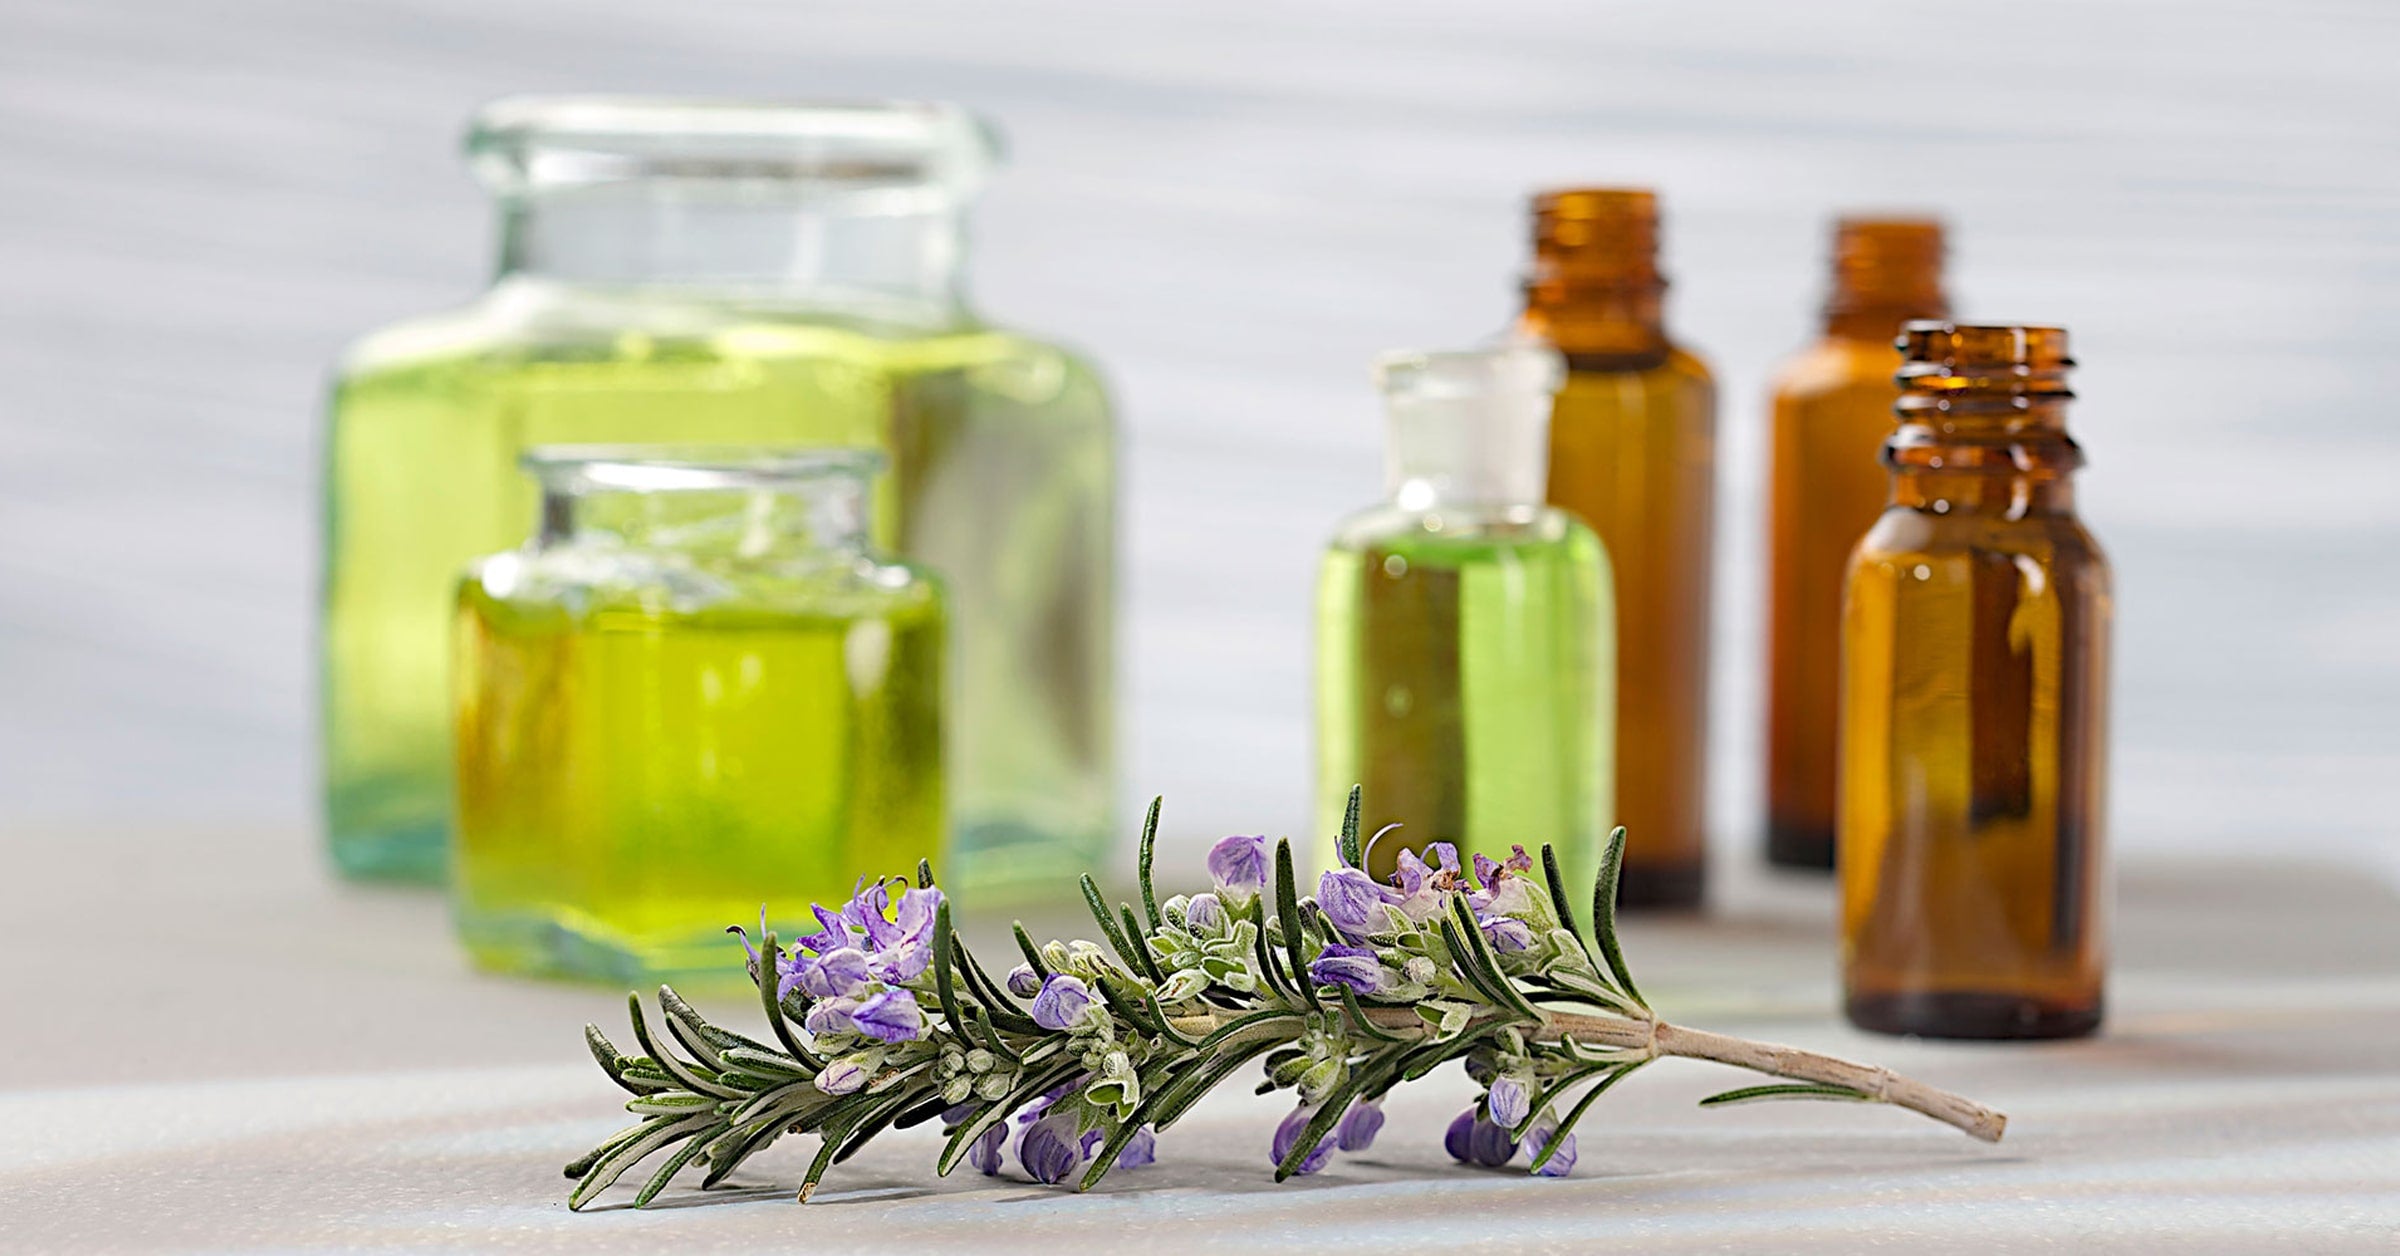 Create Your Own” Essential Oils Set of 6 Oils & Blends